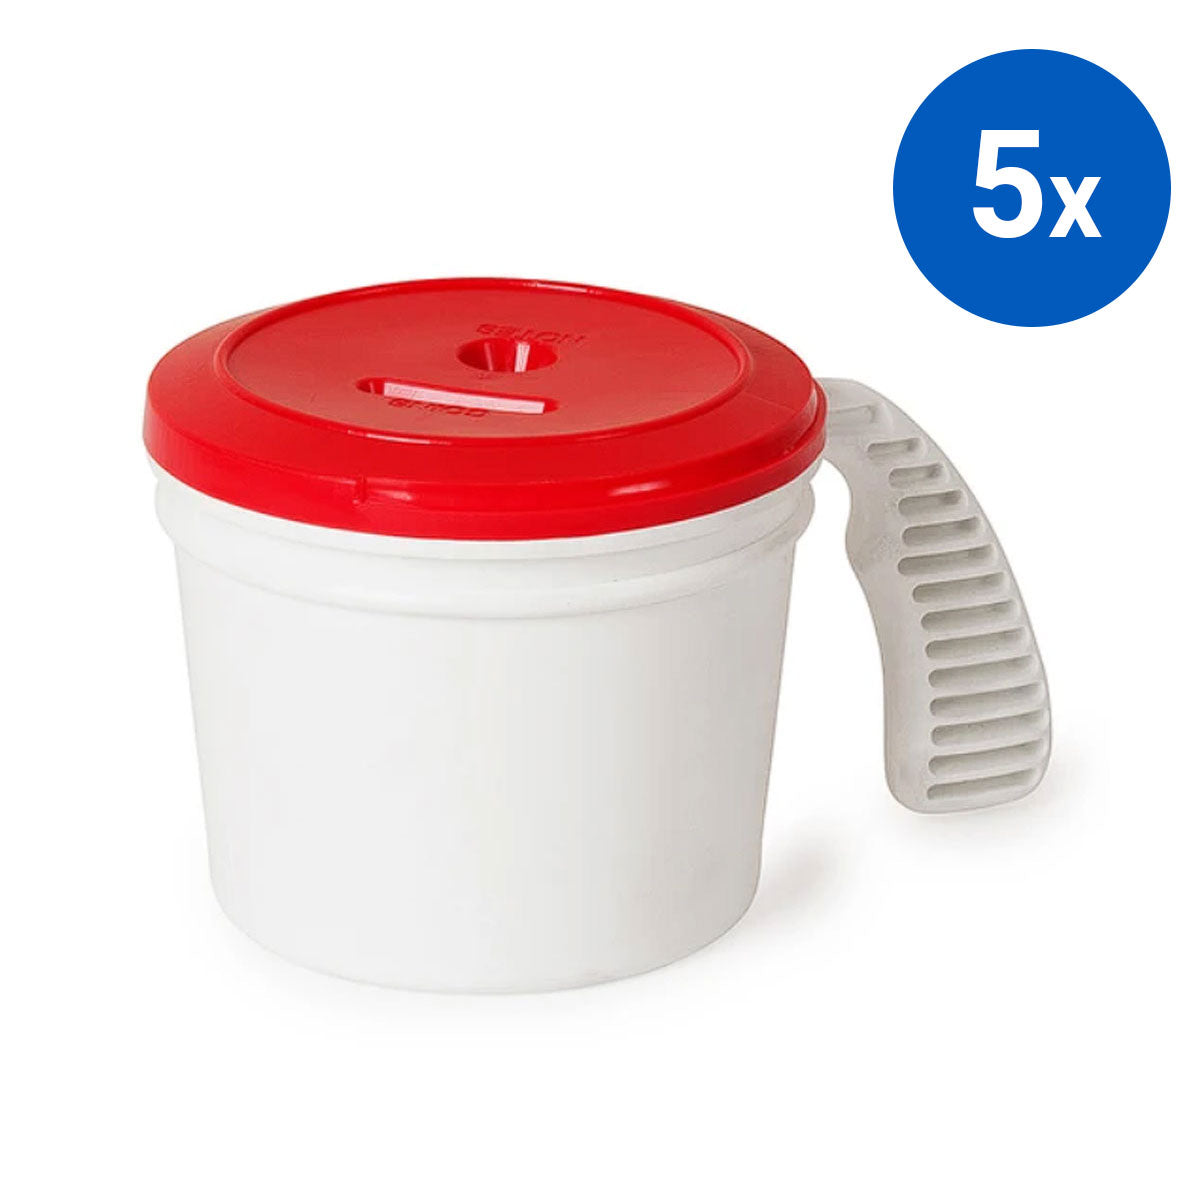 5x Collection Container Base and Standard Lid - Red